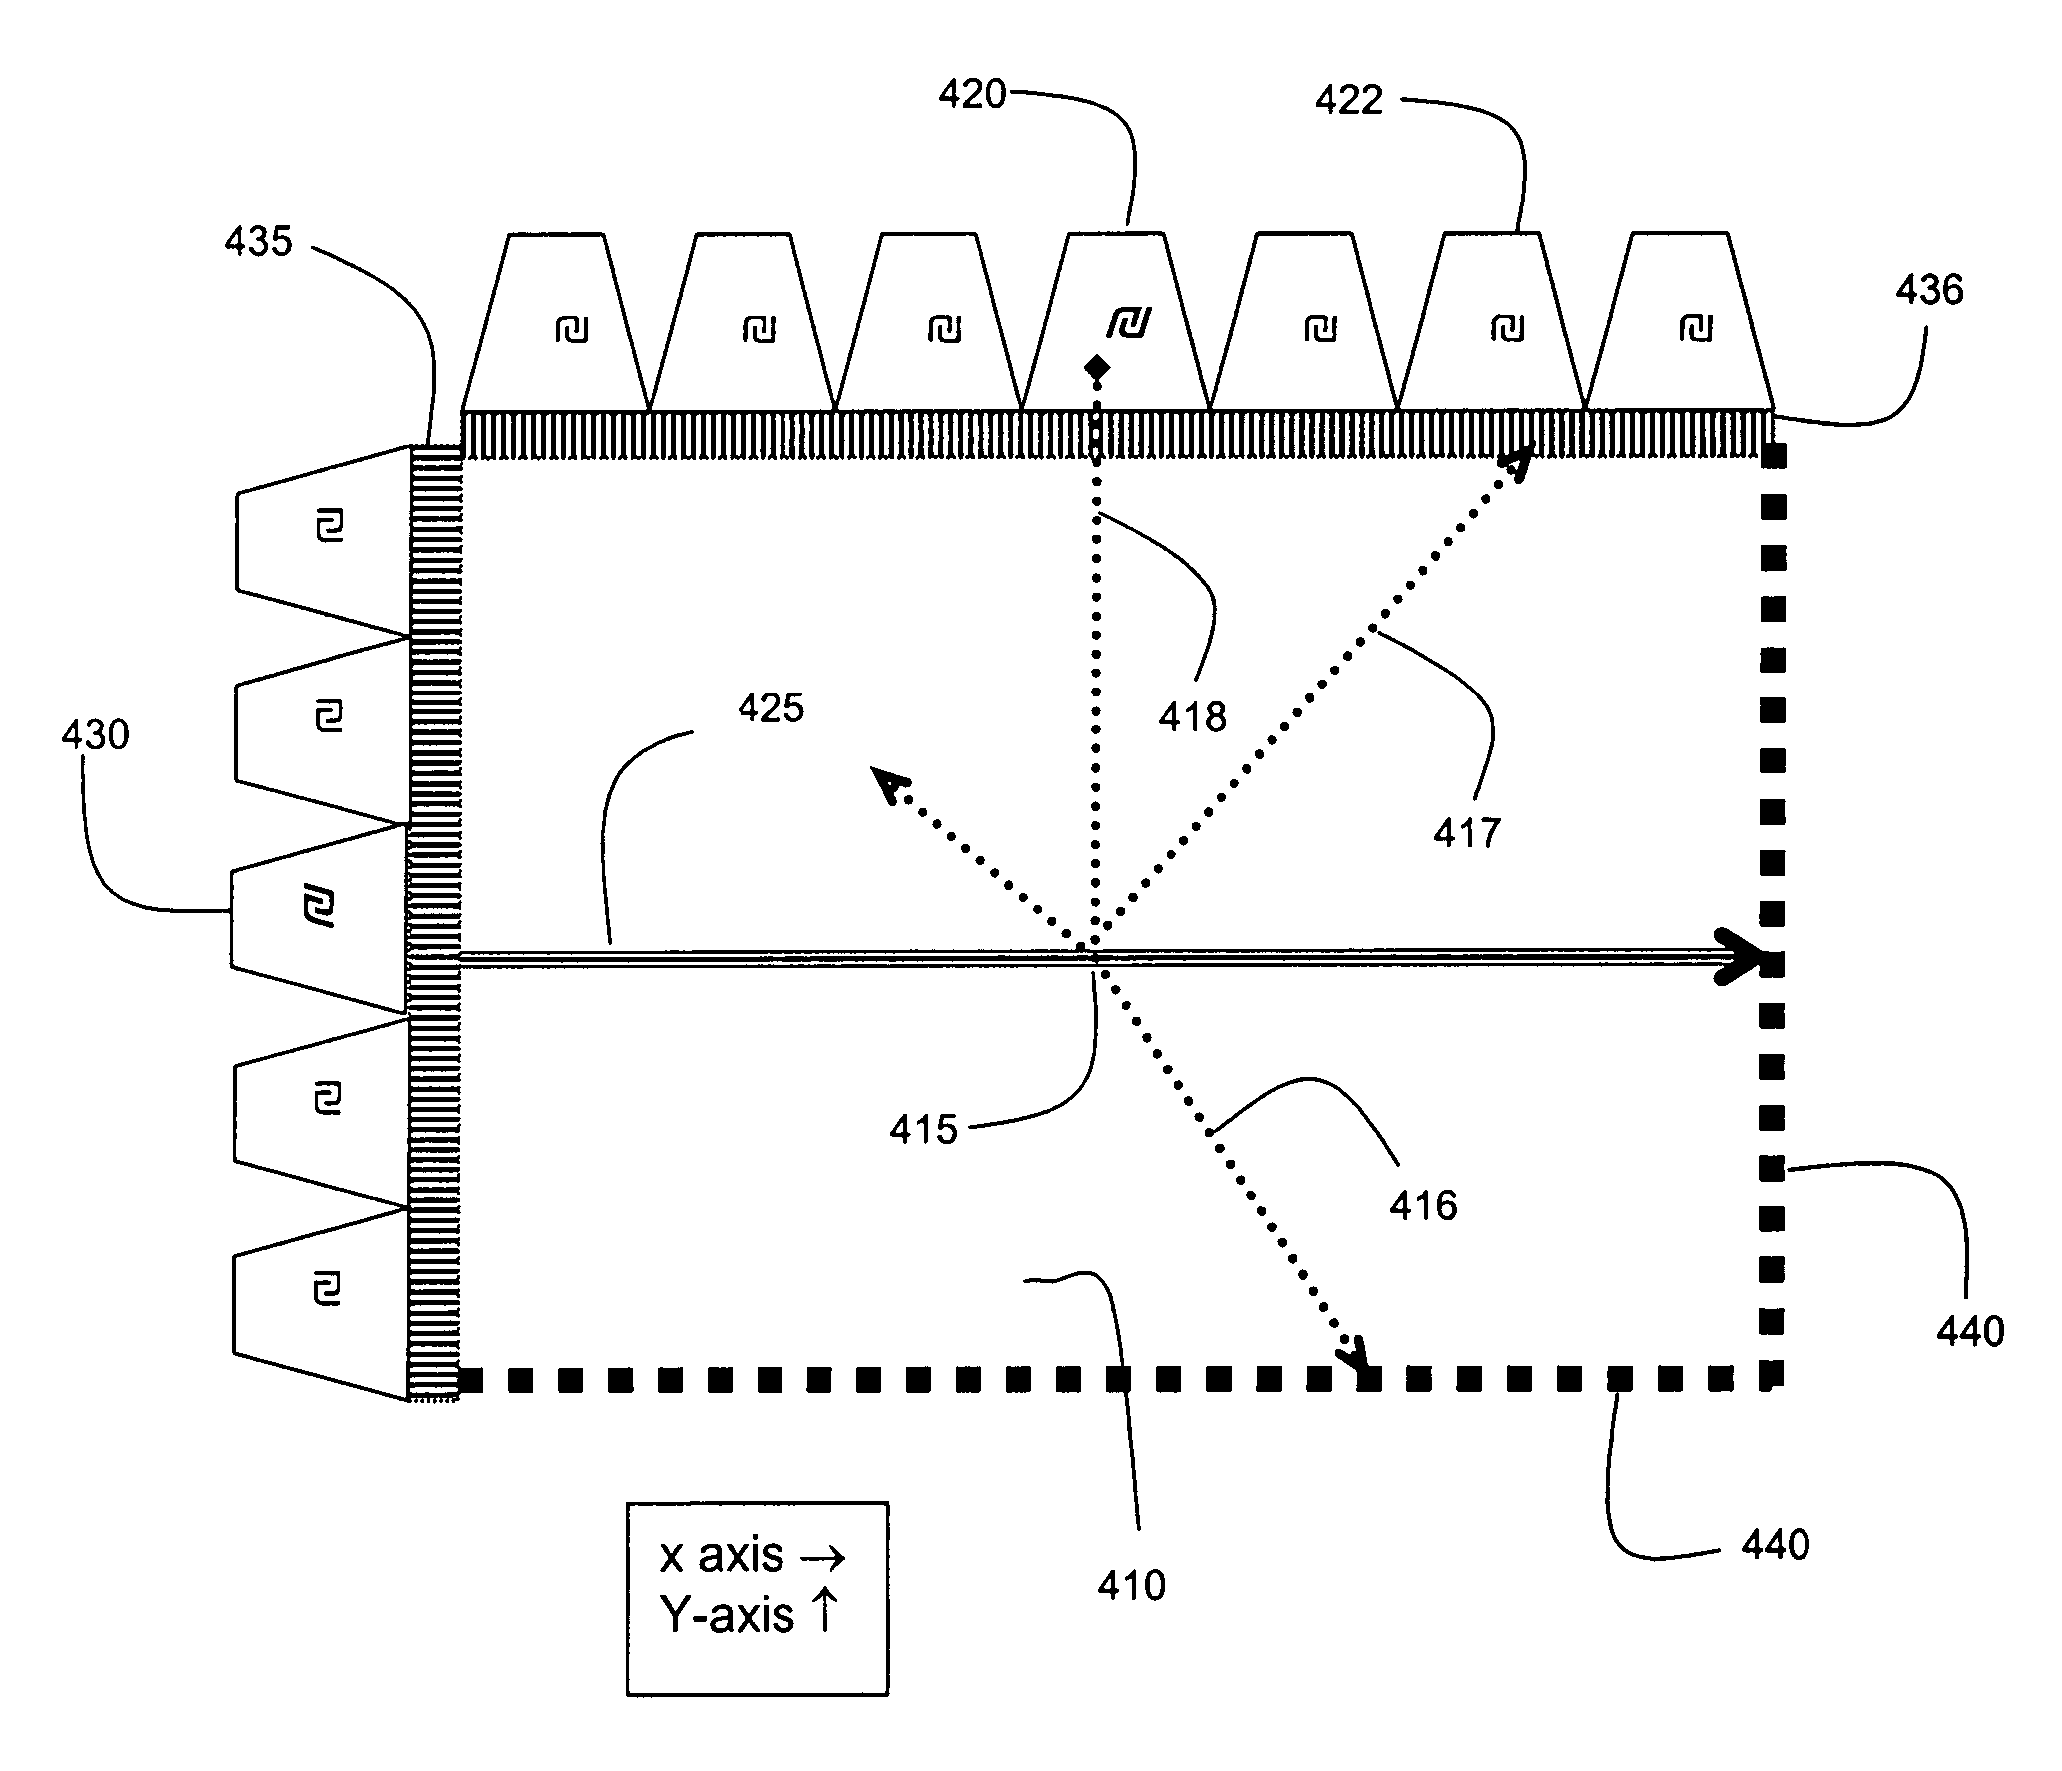 Photonic touch screen apparatus and method of use